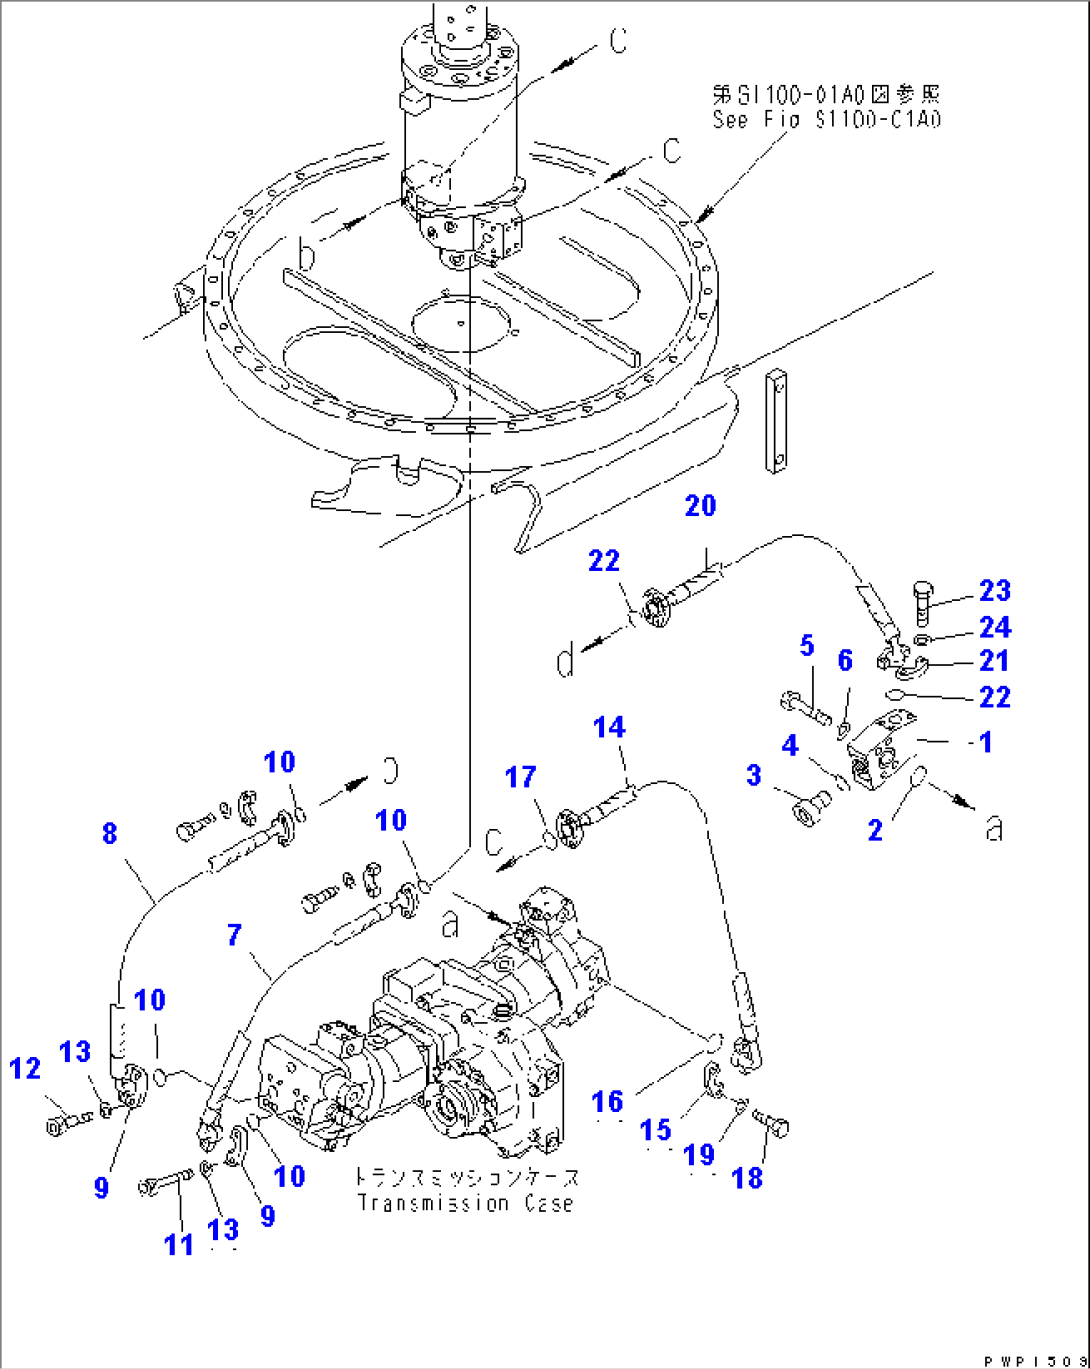 TRAVEL LINE (SWIVEL JOINT TO TRAVEL MOTOR) (HDBP)(#K32009-)